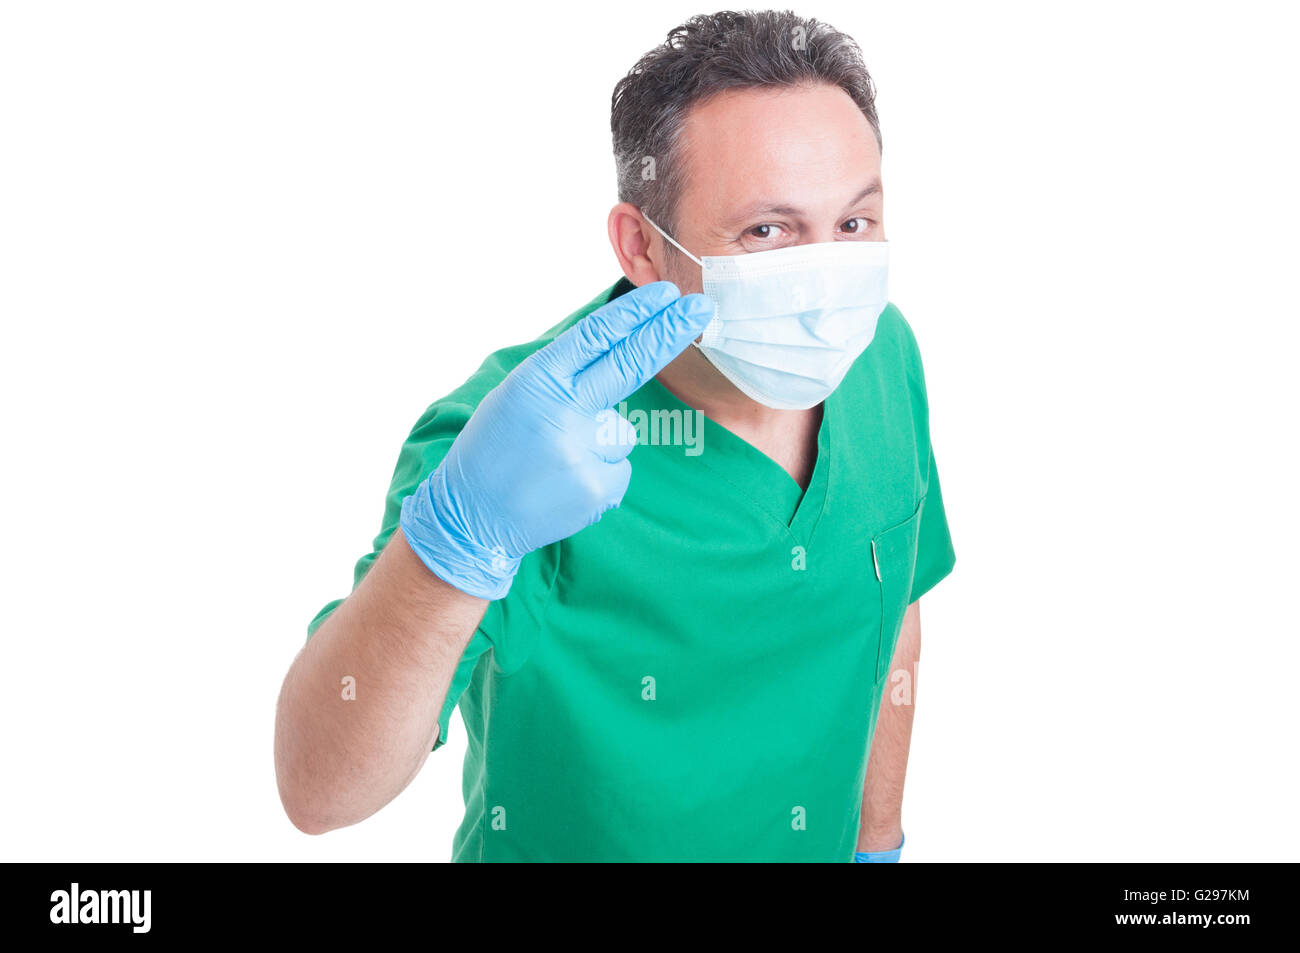 Confident gynecologist or proctologist doctor showing two fingers with latex or rubber glove Stock Photo